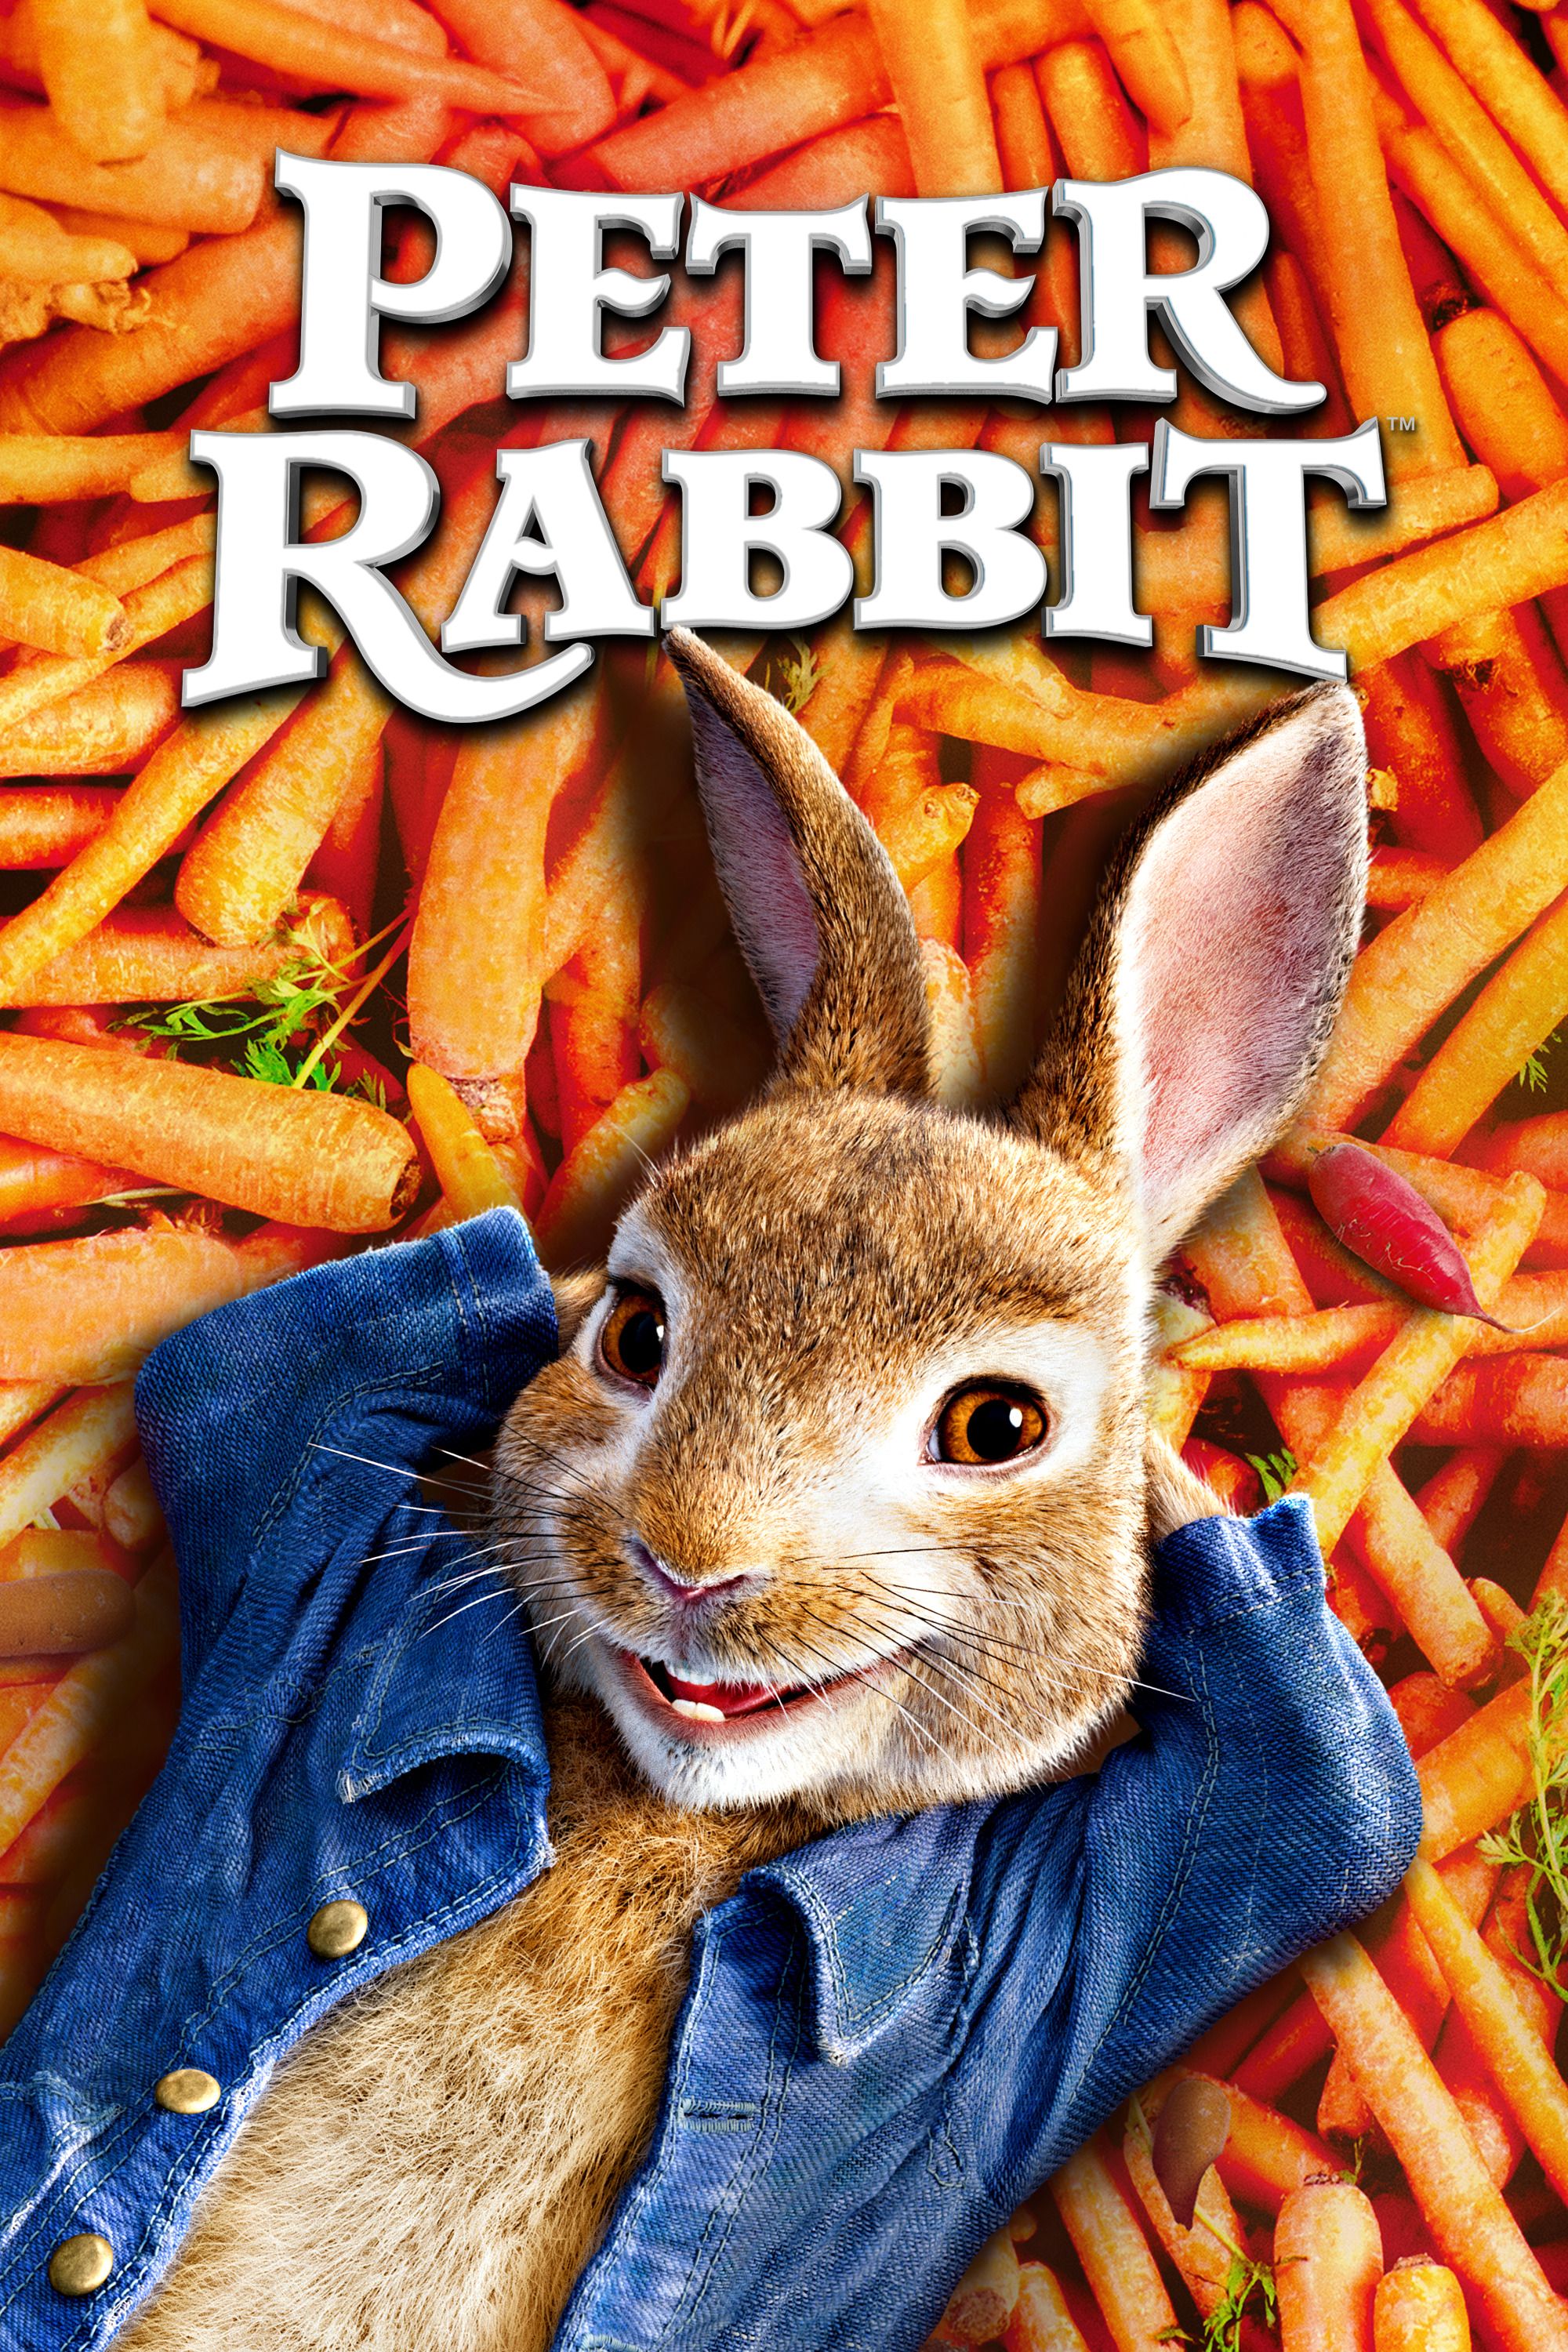 Romanticism v realism: Peter Rabbit digs up cinema's conflicted